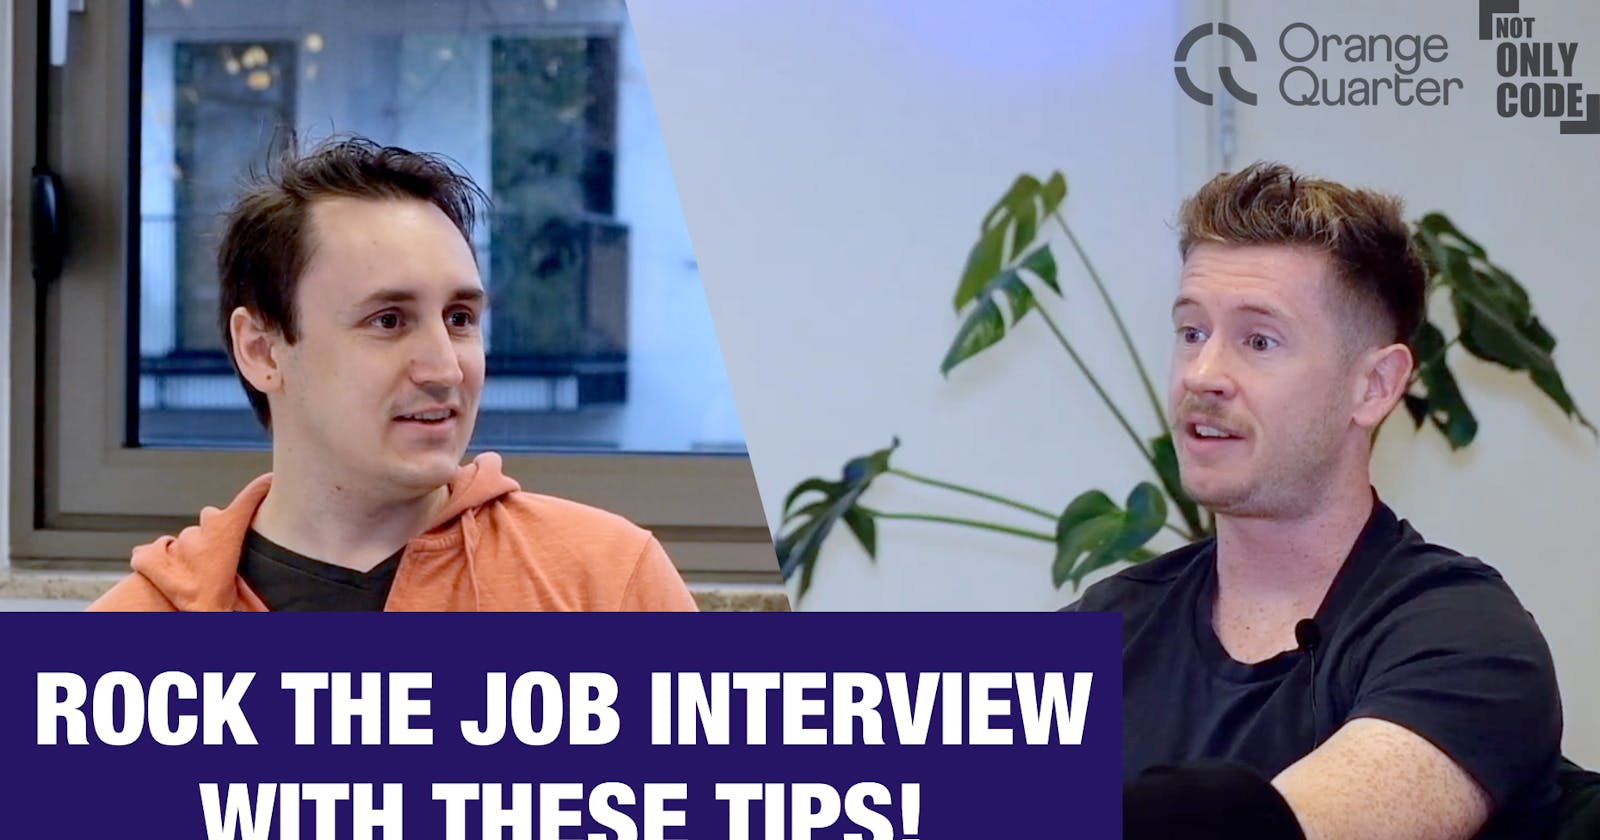 How to pass job interview - chat with tech recruiter